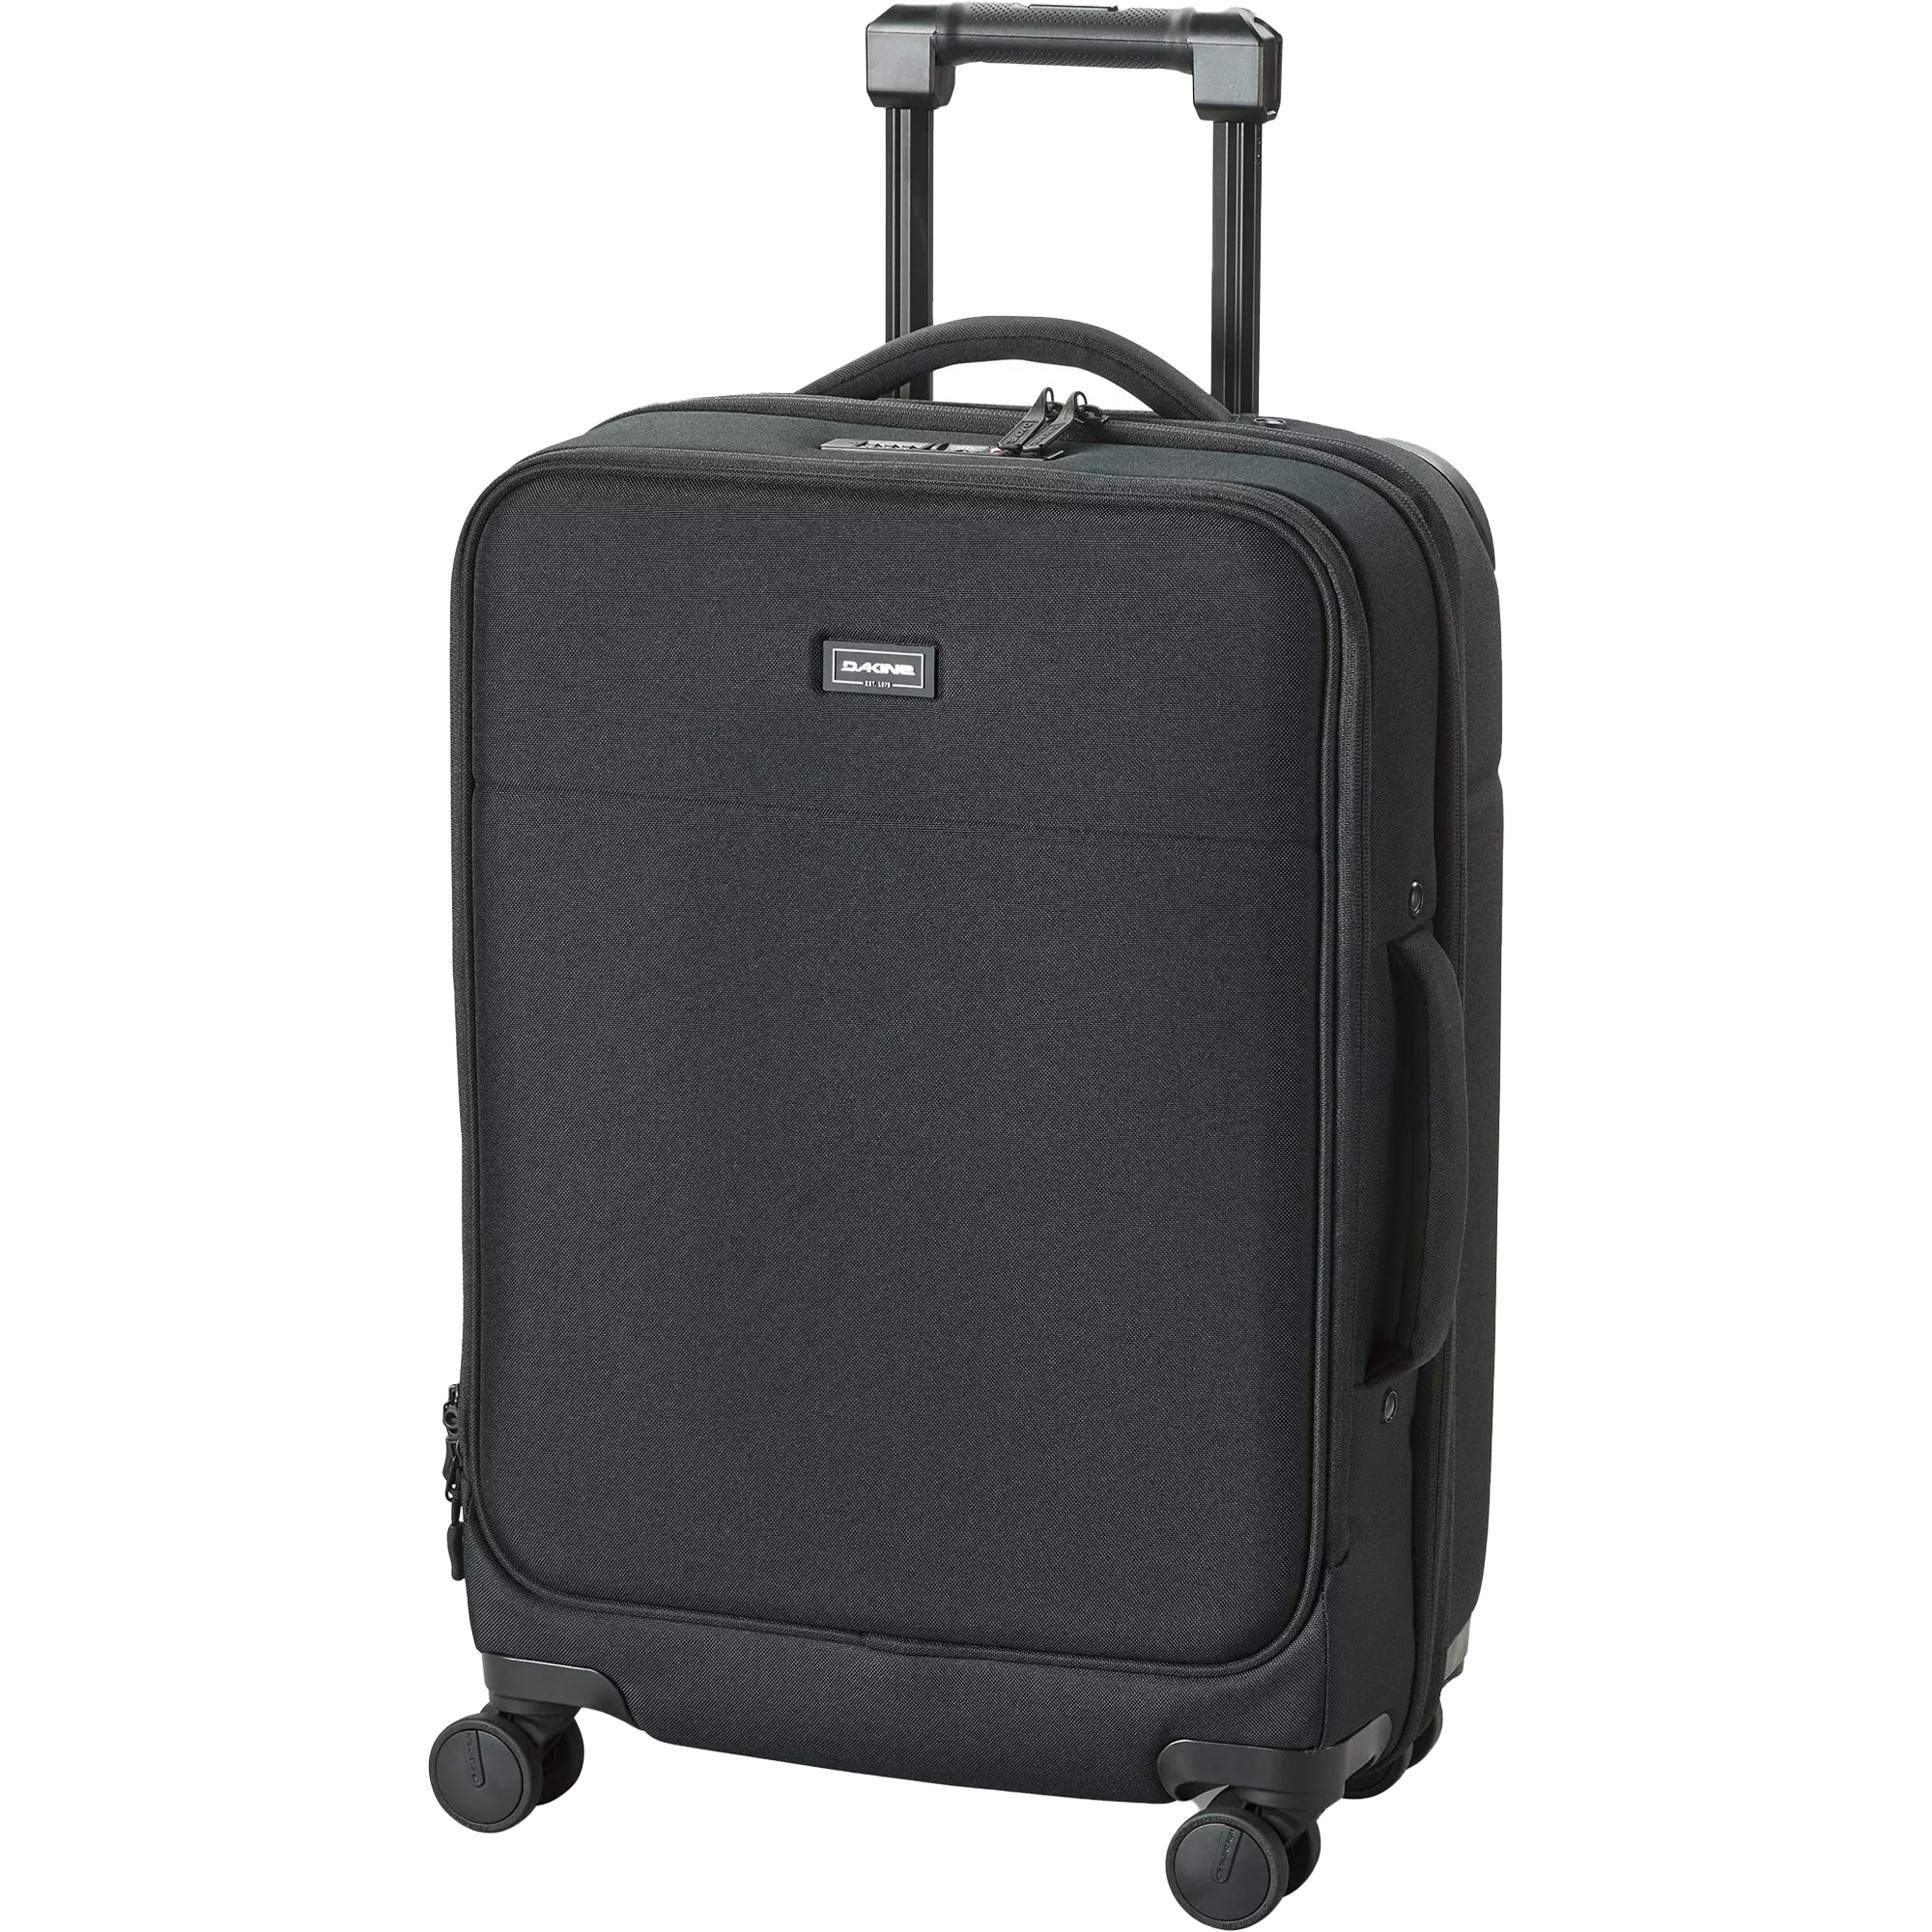 Photos - Travel Bags DAKINE Verge Carry On Spinner Wheeled Travel Suitcase, 42L + Black D100037 